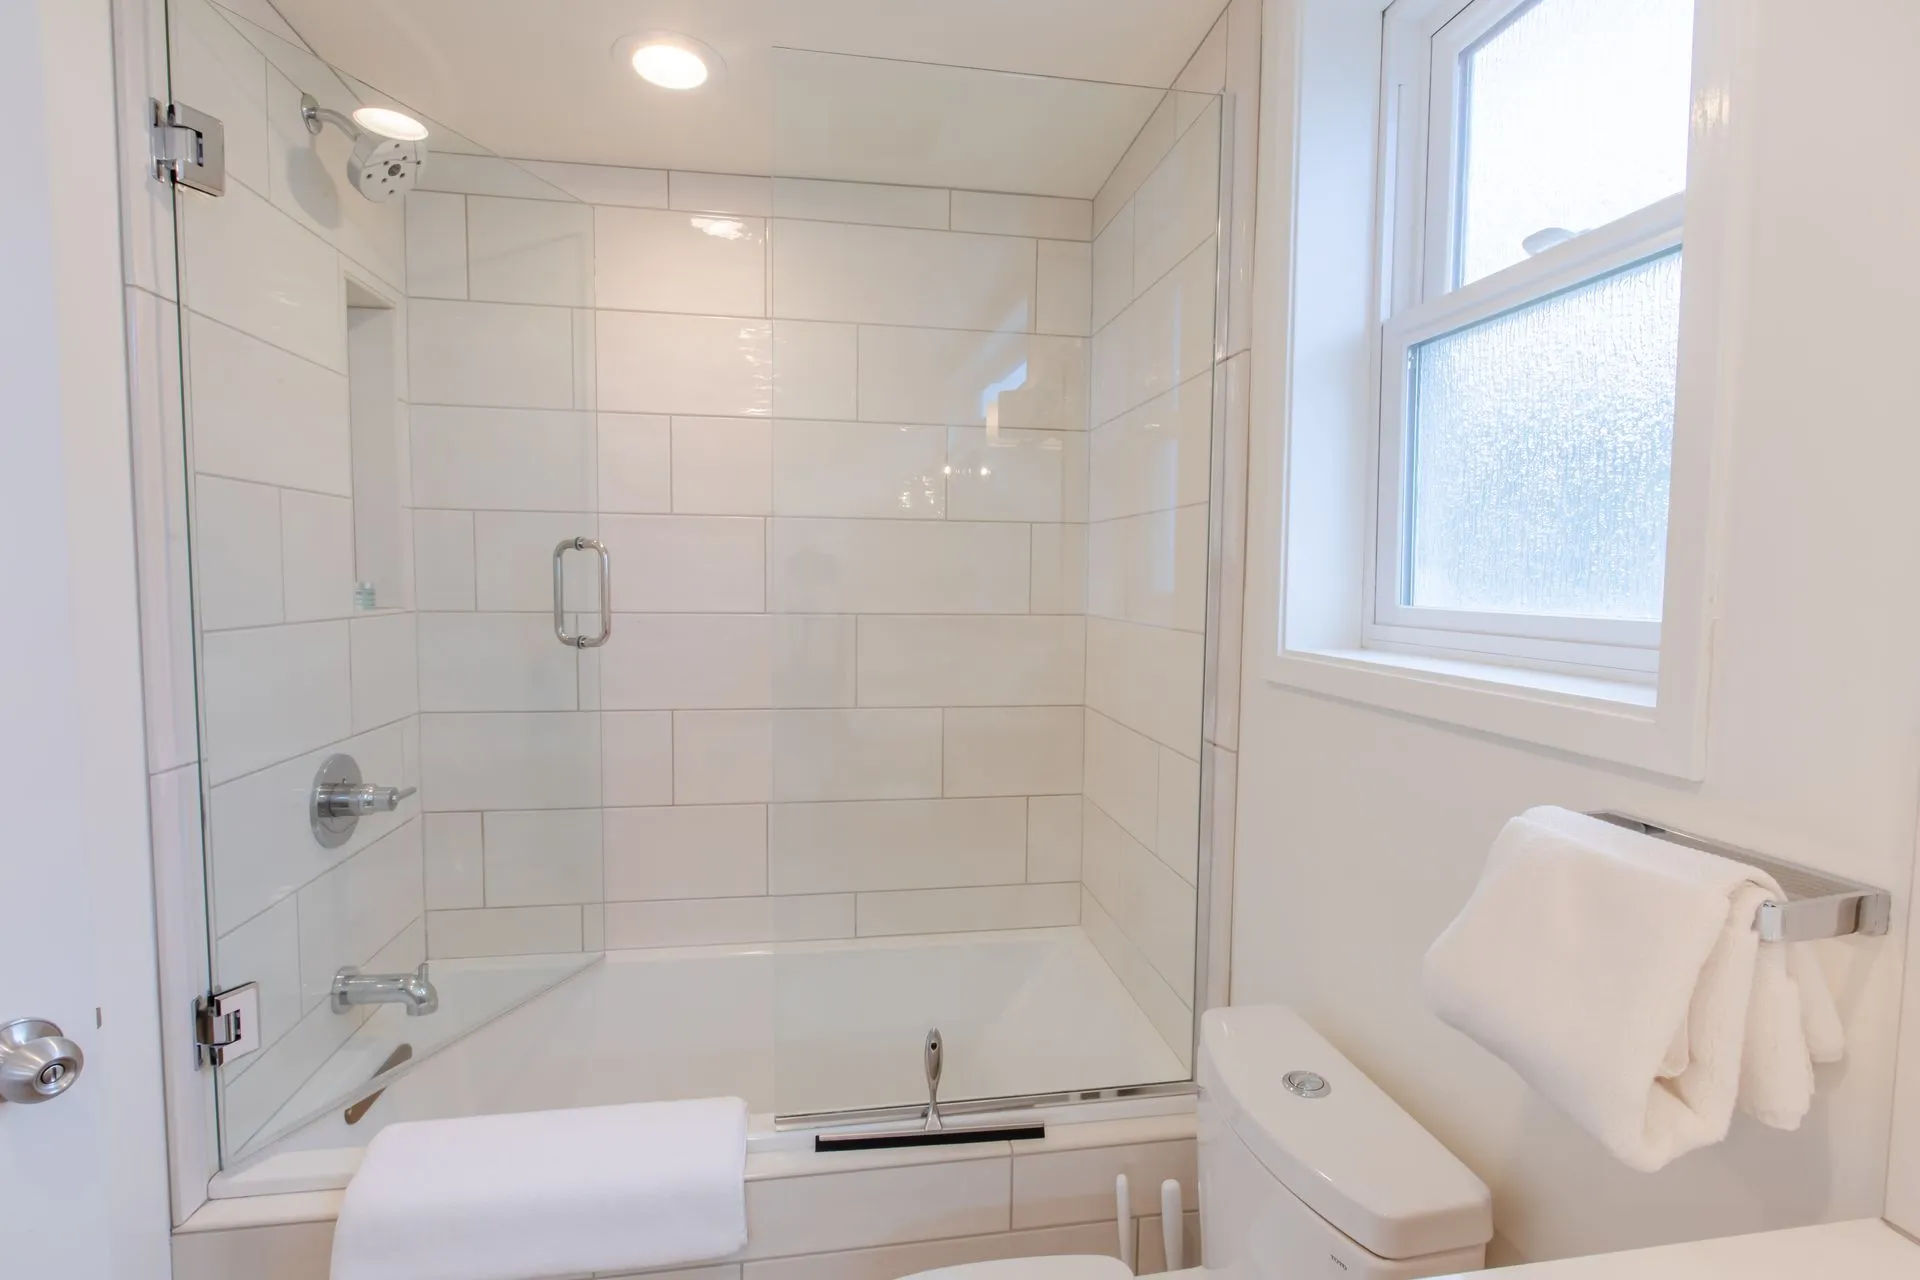 Vacation Rental in Cannon Beach, Sona Tra bathroom with shower and tub combo